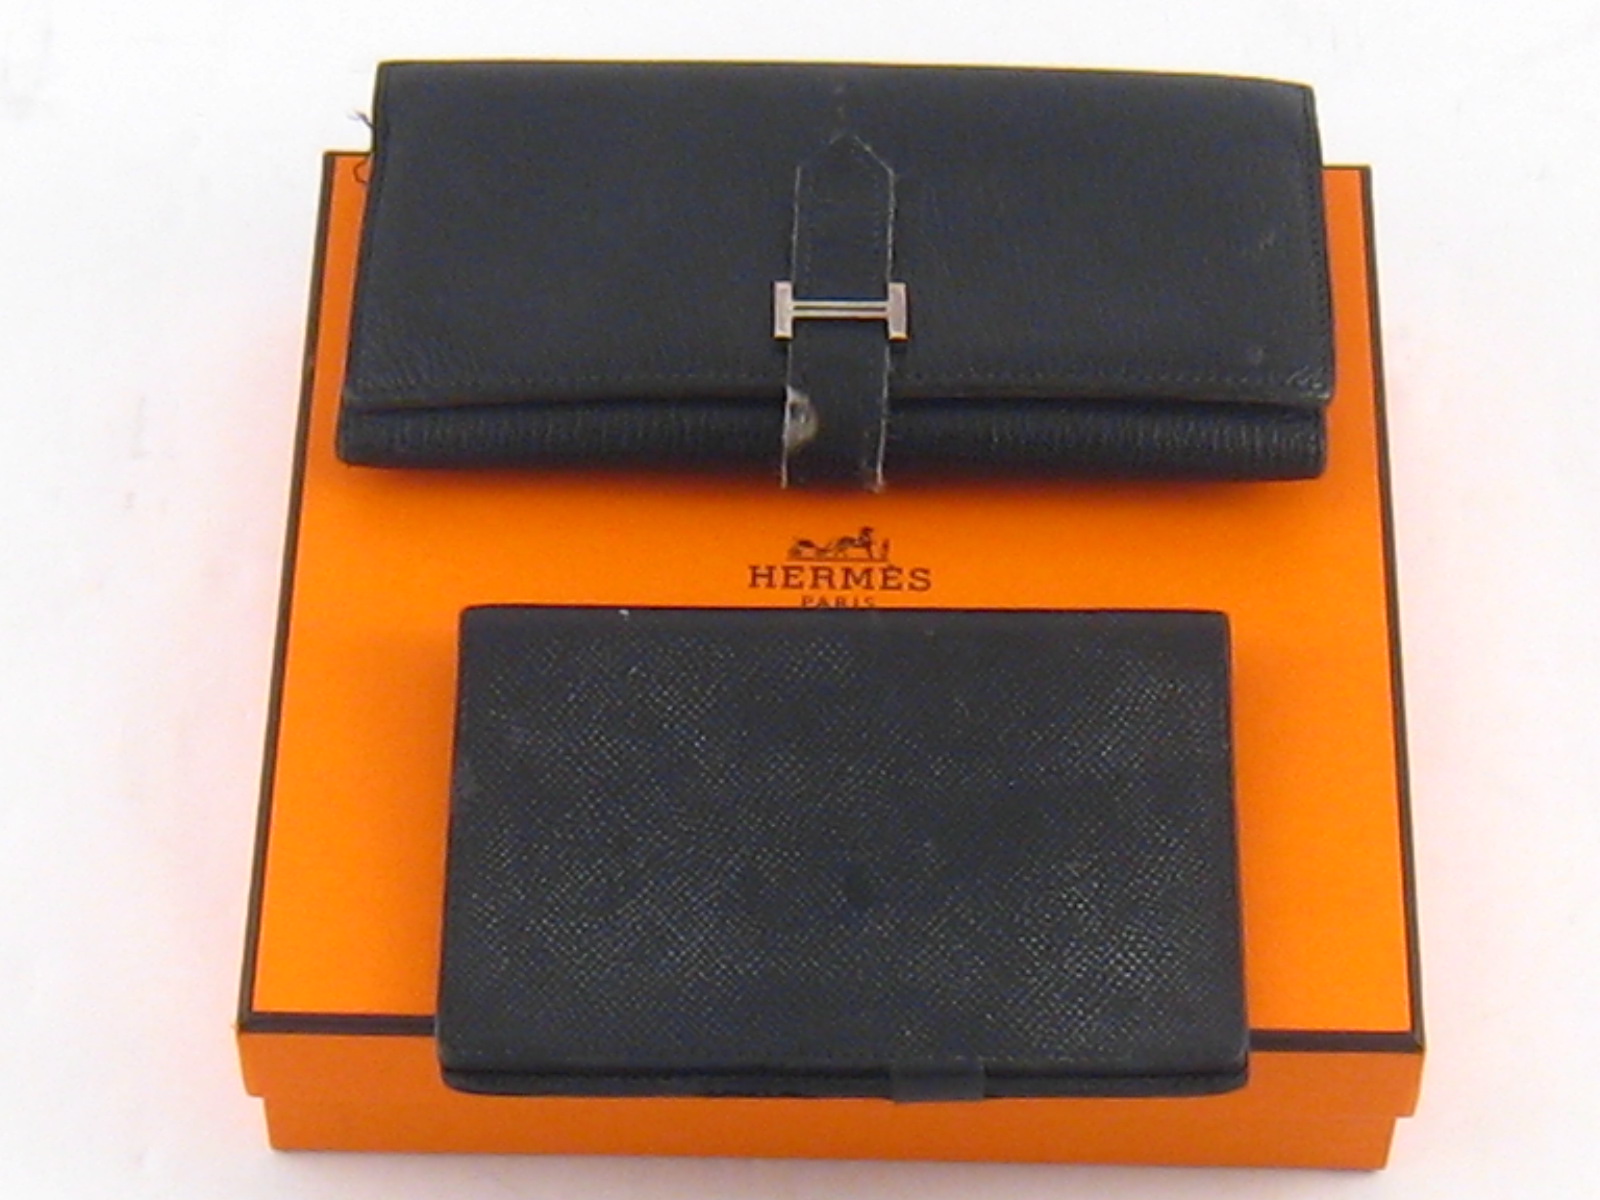 Vintage Hermes. A purse/wallet and a folding notebook cover in a later Hermes box.